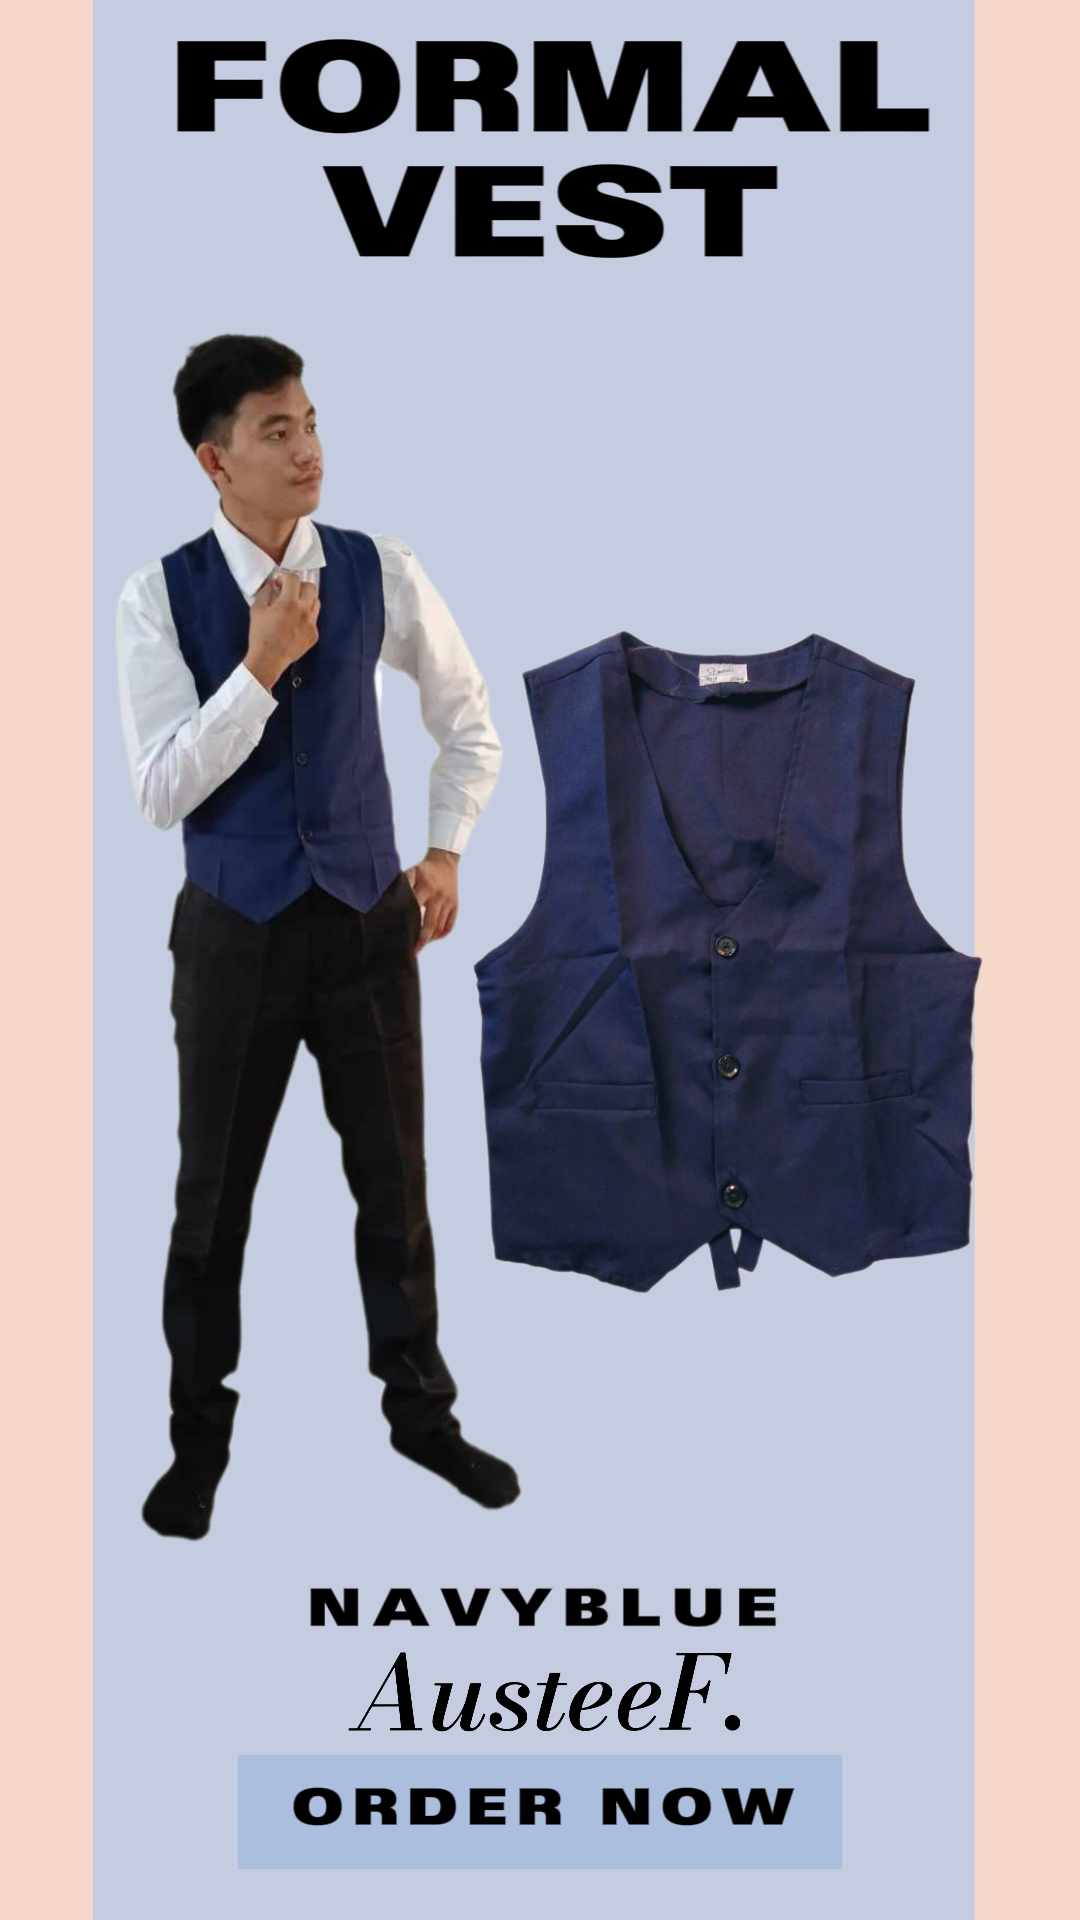 Amazon.com: S.H. Churchill & Co. Boys 3 Piece Backless Formal Vest Set –  Includes Vest, Bow Tie, Pocket Square for Tuxedo or Suit, Black S :  Clothing, Shoes & Jewelry